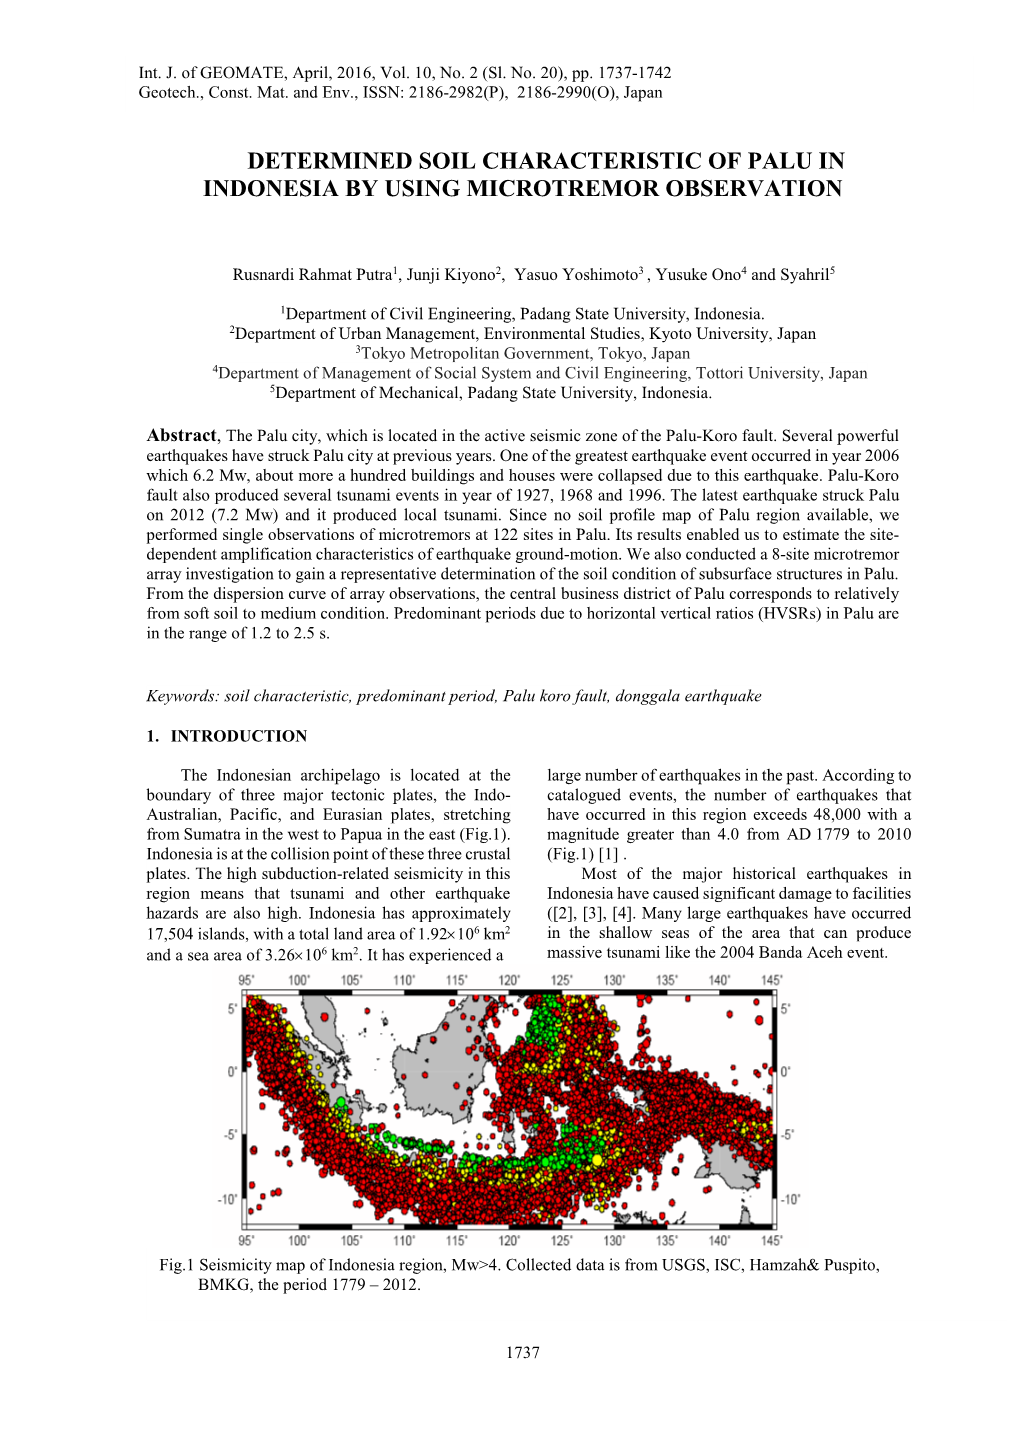 Determined Soil Characteristic of Palu in Indonesia by Using Microtremor Observation